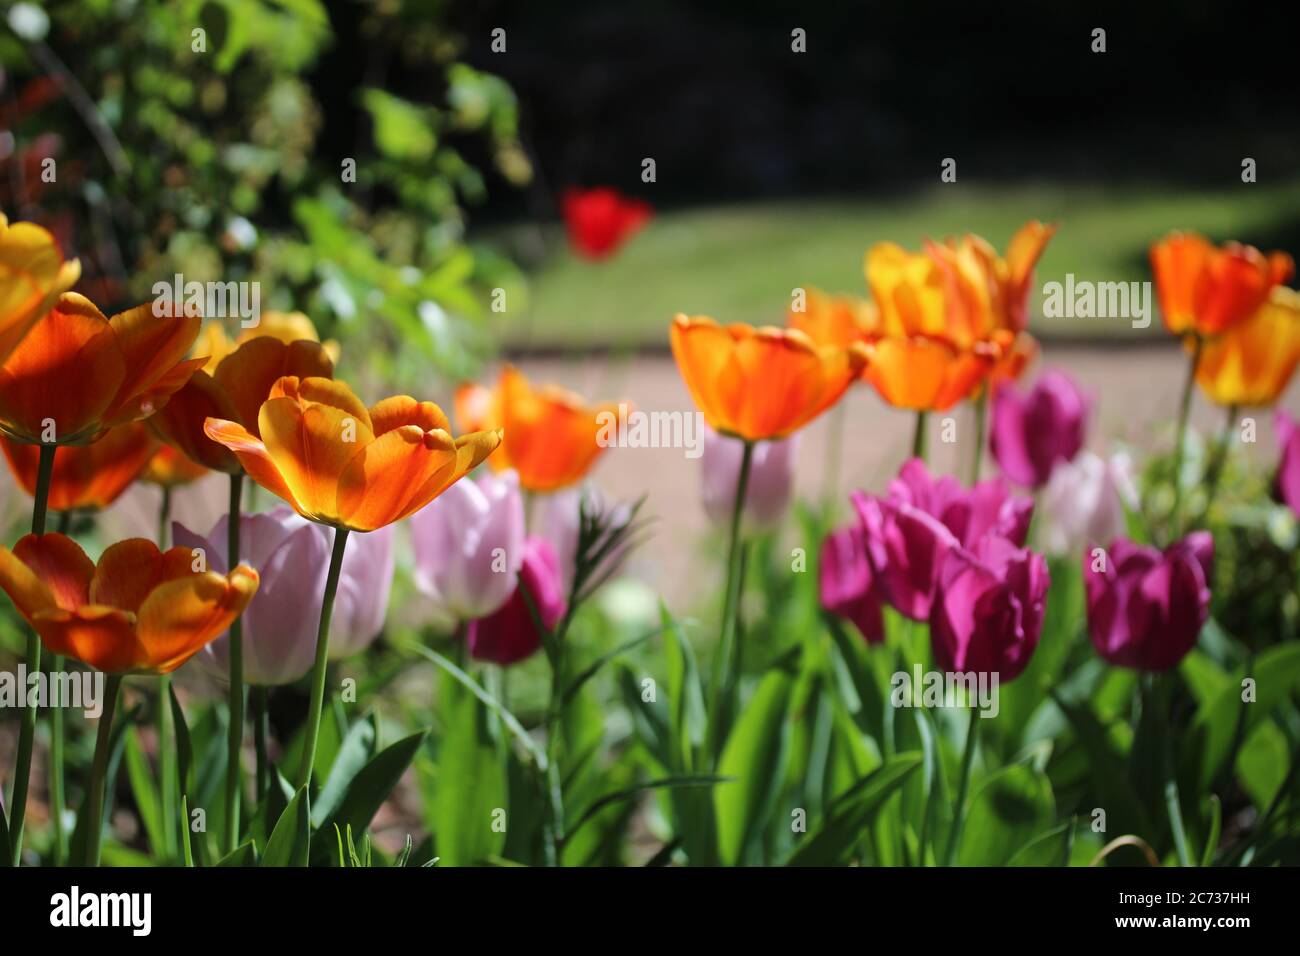 Some colorful tulips glow in the sun Stock Photo